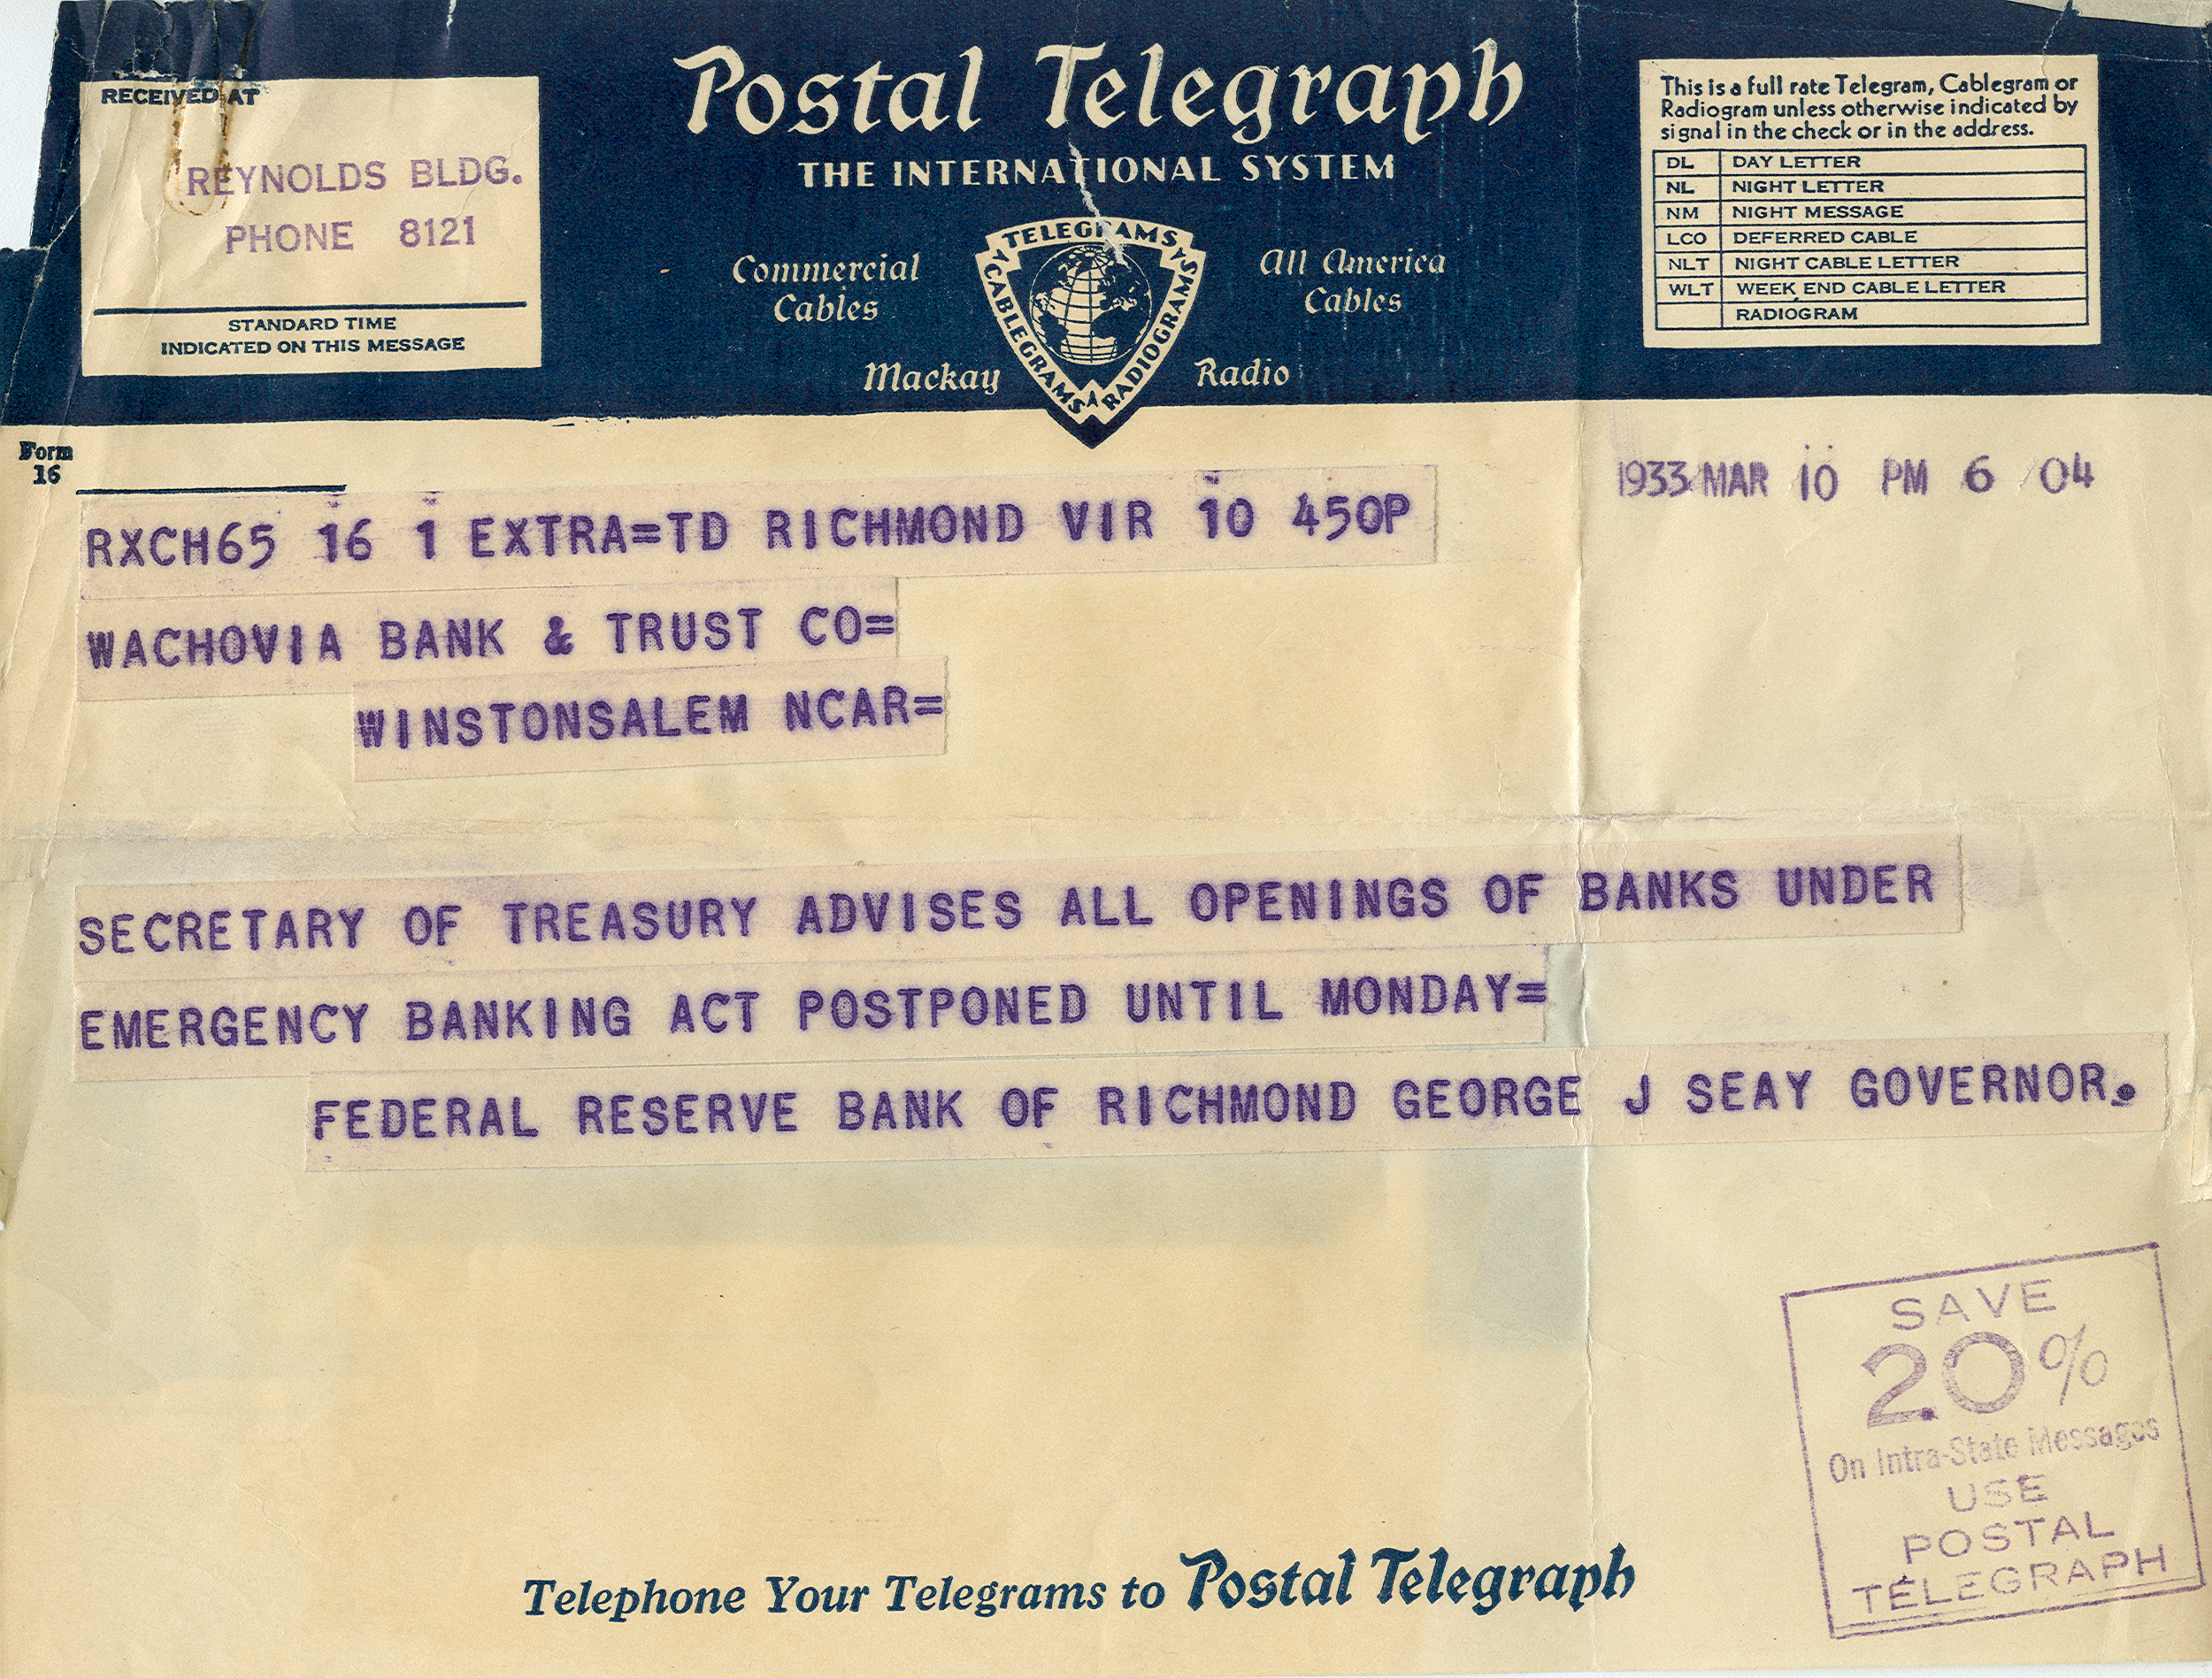 A yellow telegram with blue lettering. Header reads Postal Telegraph the International System. Message reads: Secretary of treasury advises all openings of banks under emergency banking act postponed until Monday. Image link will enlarge image.